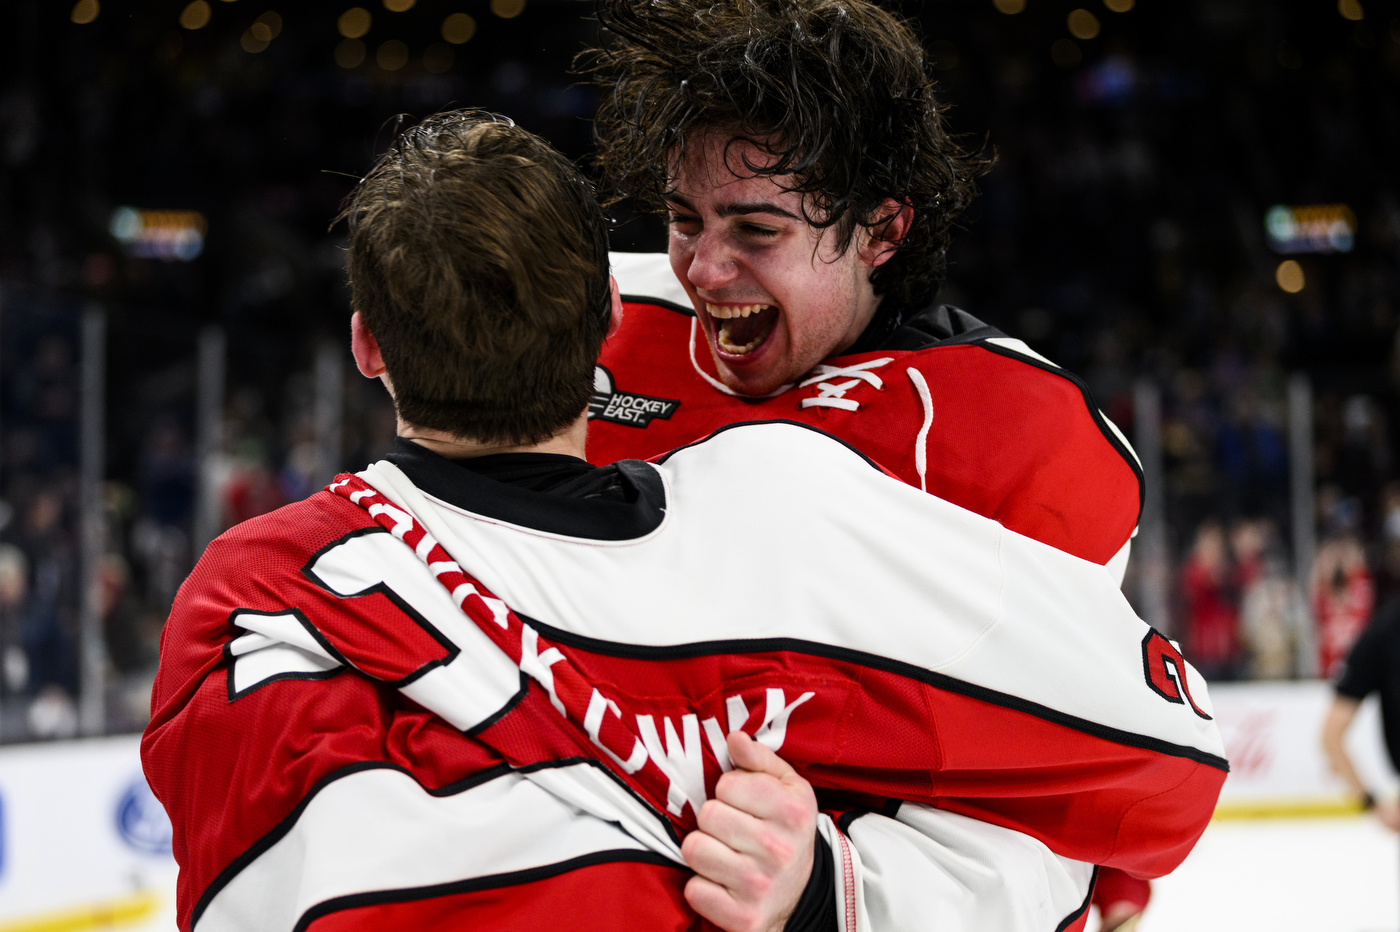 two northeastern hockey players jump into each others arms in celebration